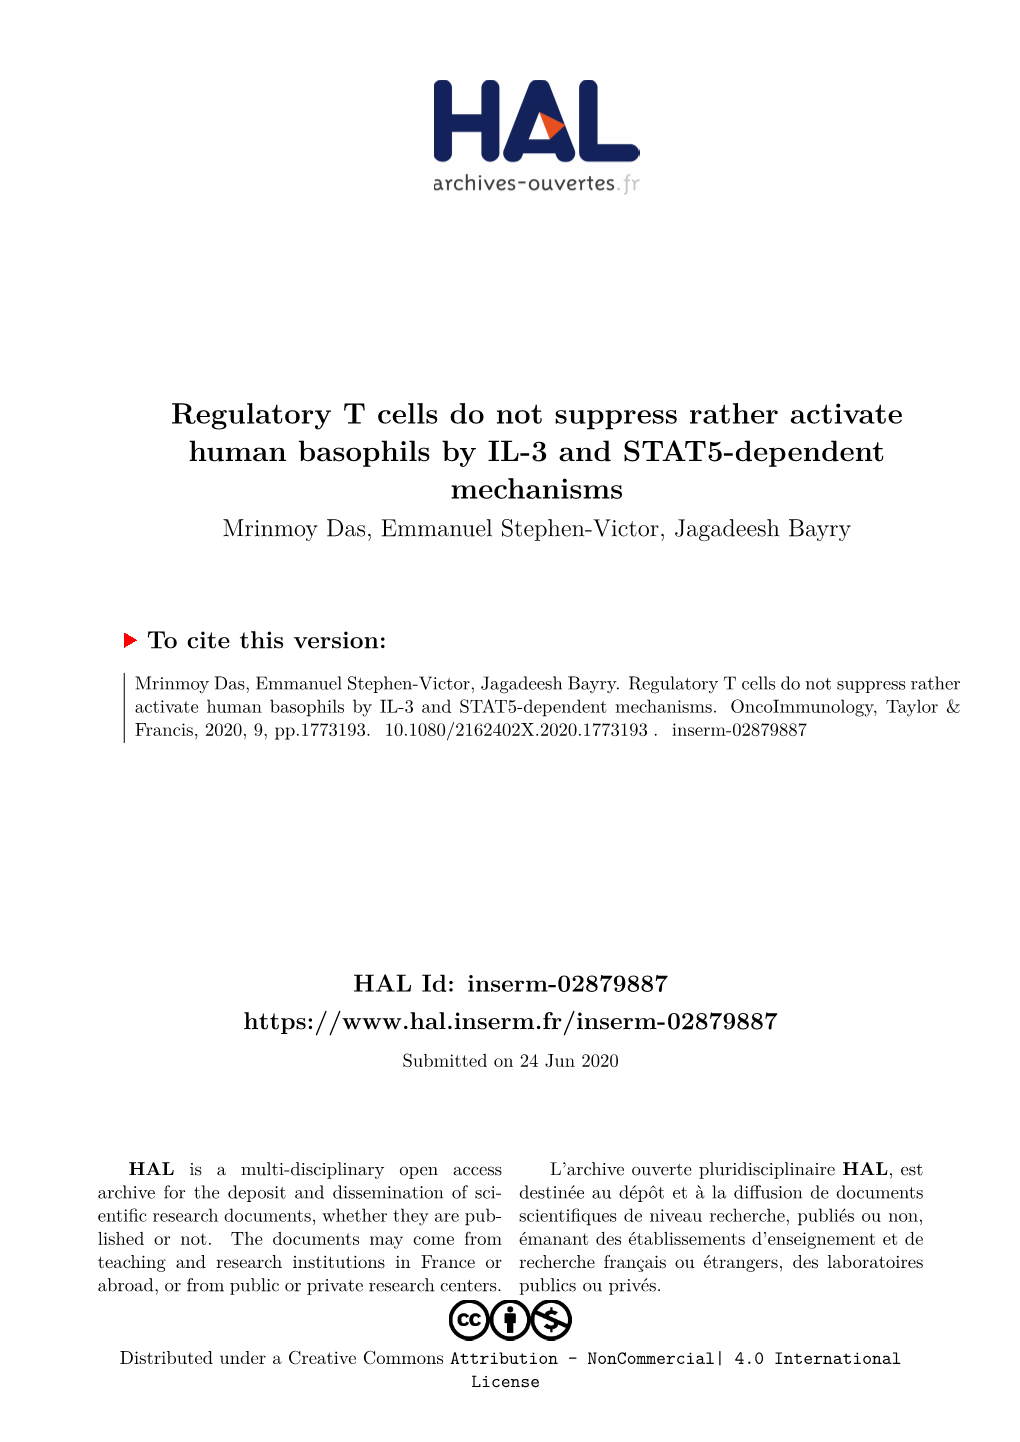 Regulatory T Cells Do Not Suppress Rather Activate Human Basophils by IL-3 and STAT5-Dependent Mechanisms Mrinmoy Das, Emmanuel Stephen-Victor, Jagadeesh Bayry